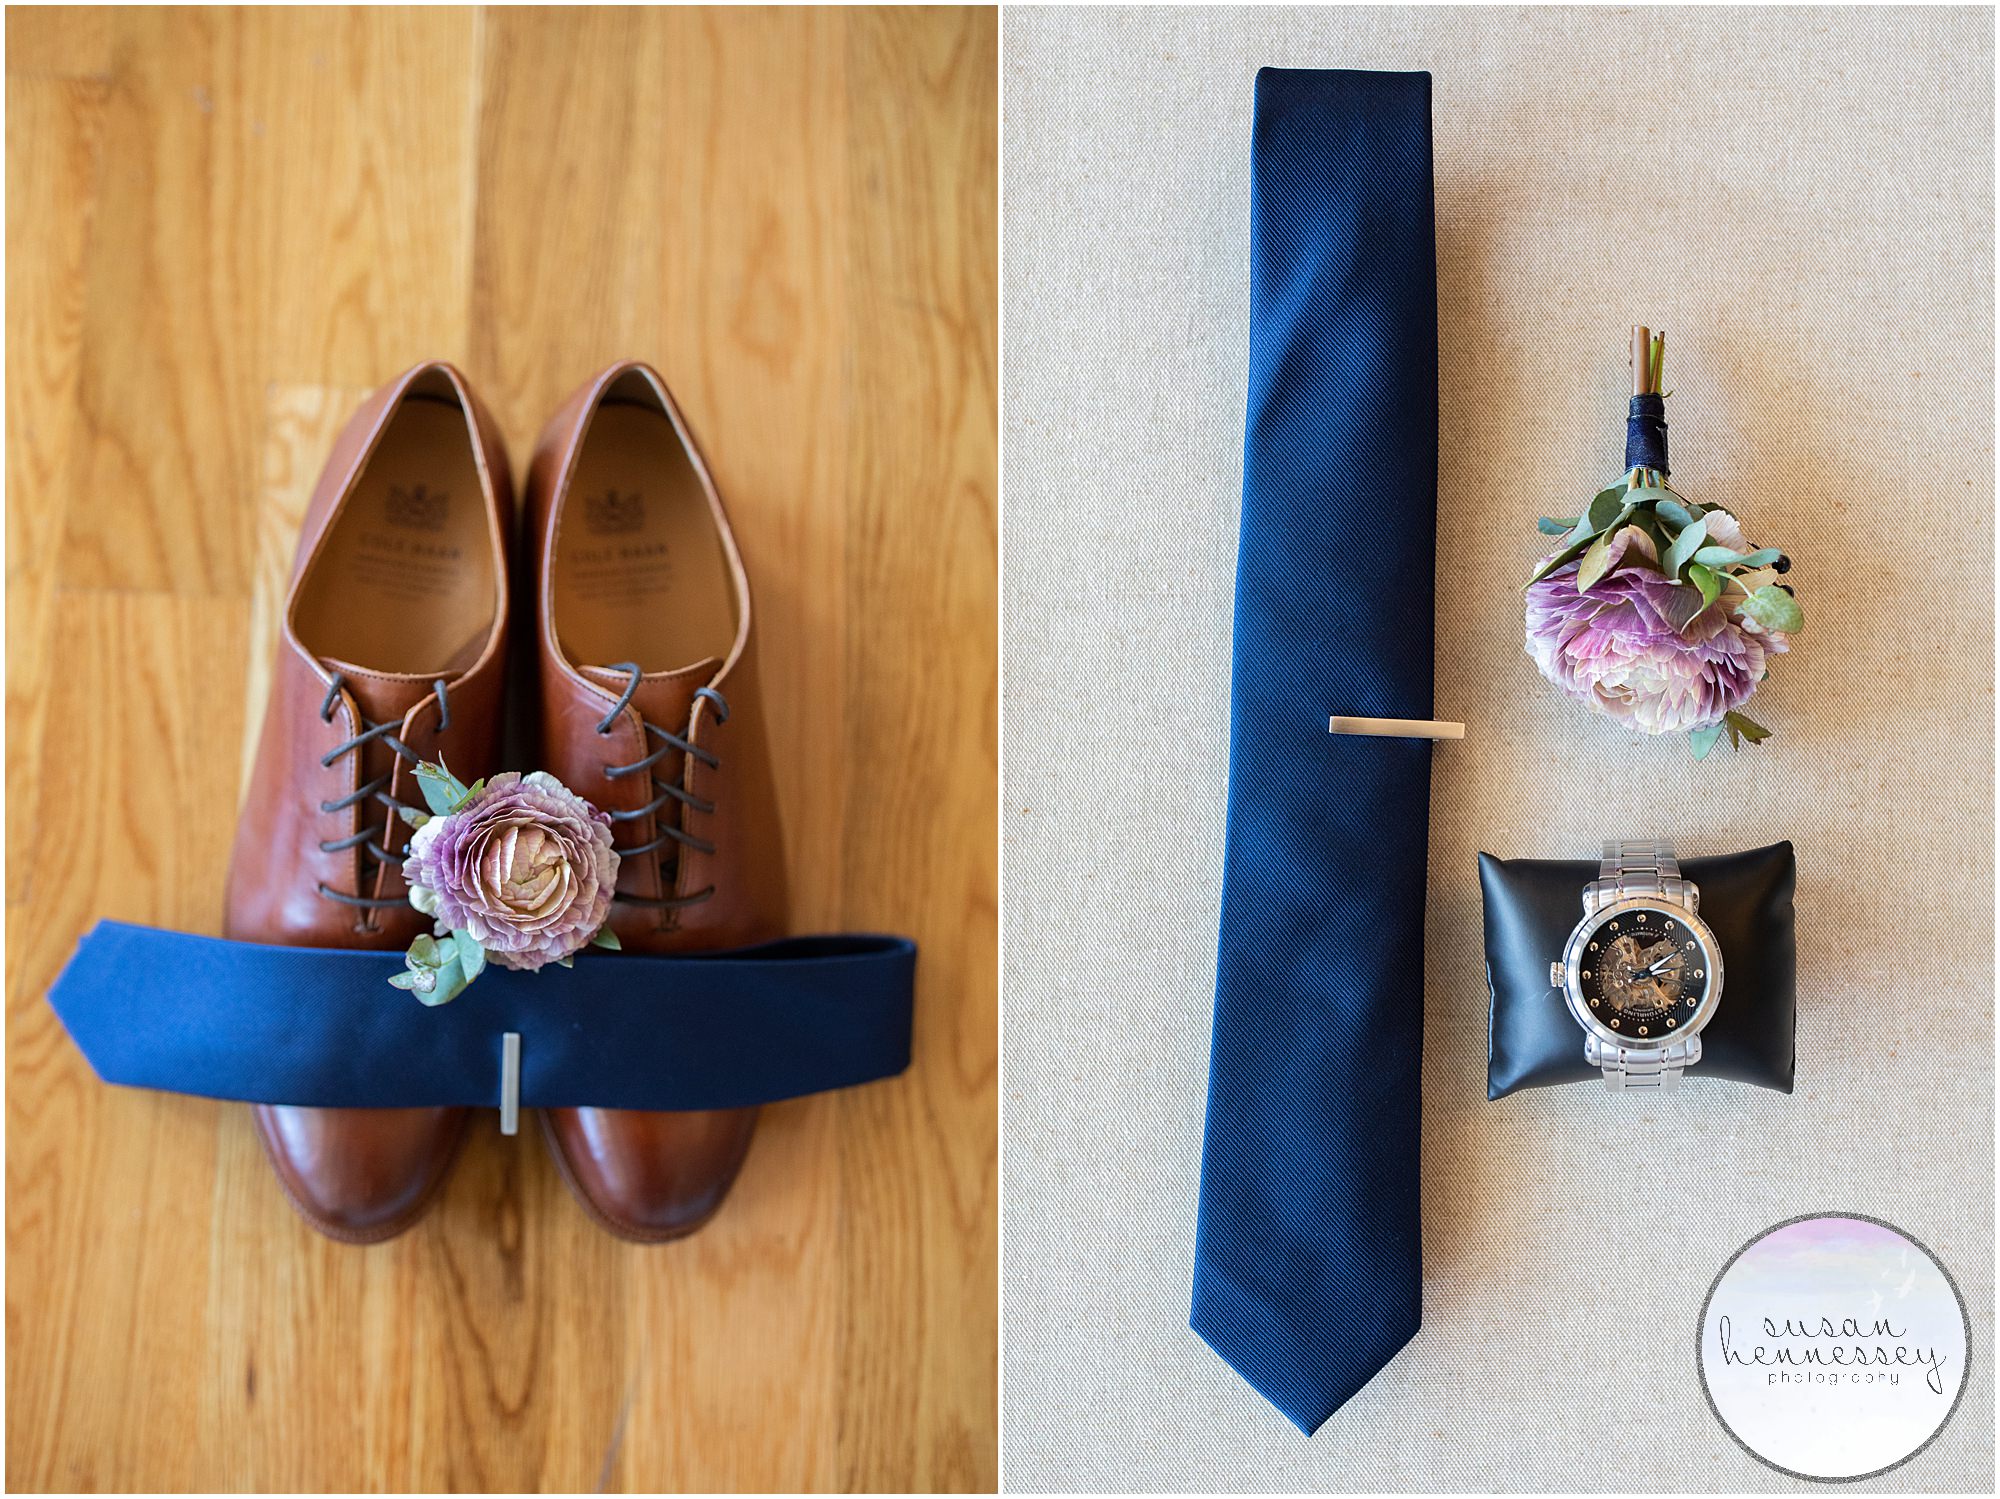 grooms shoes, tie, watch and boutonniere